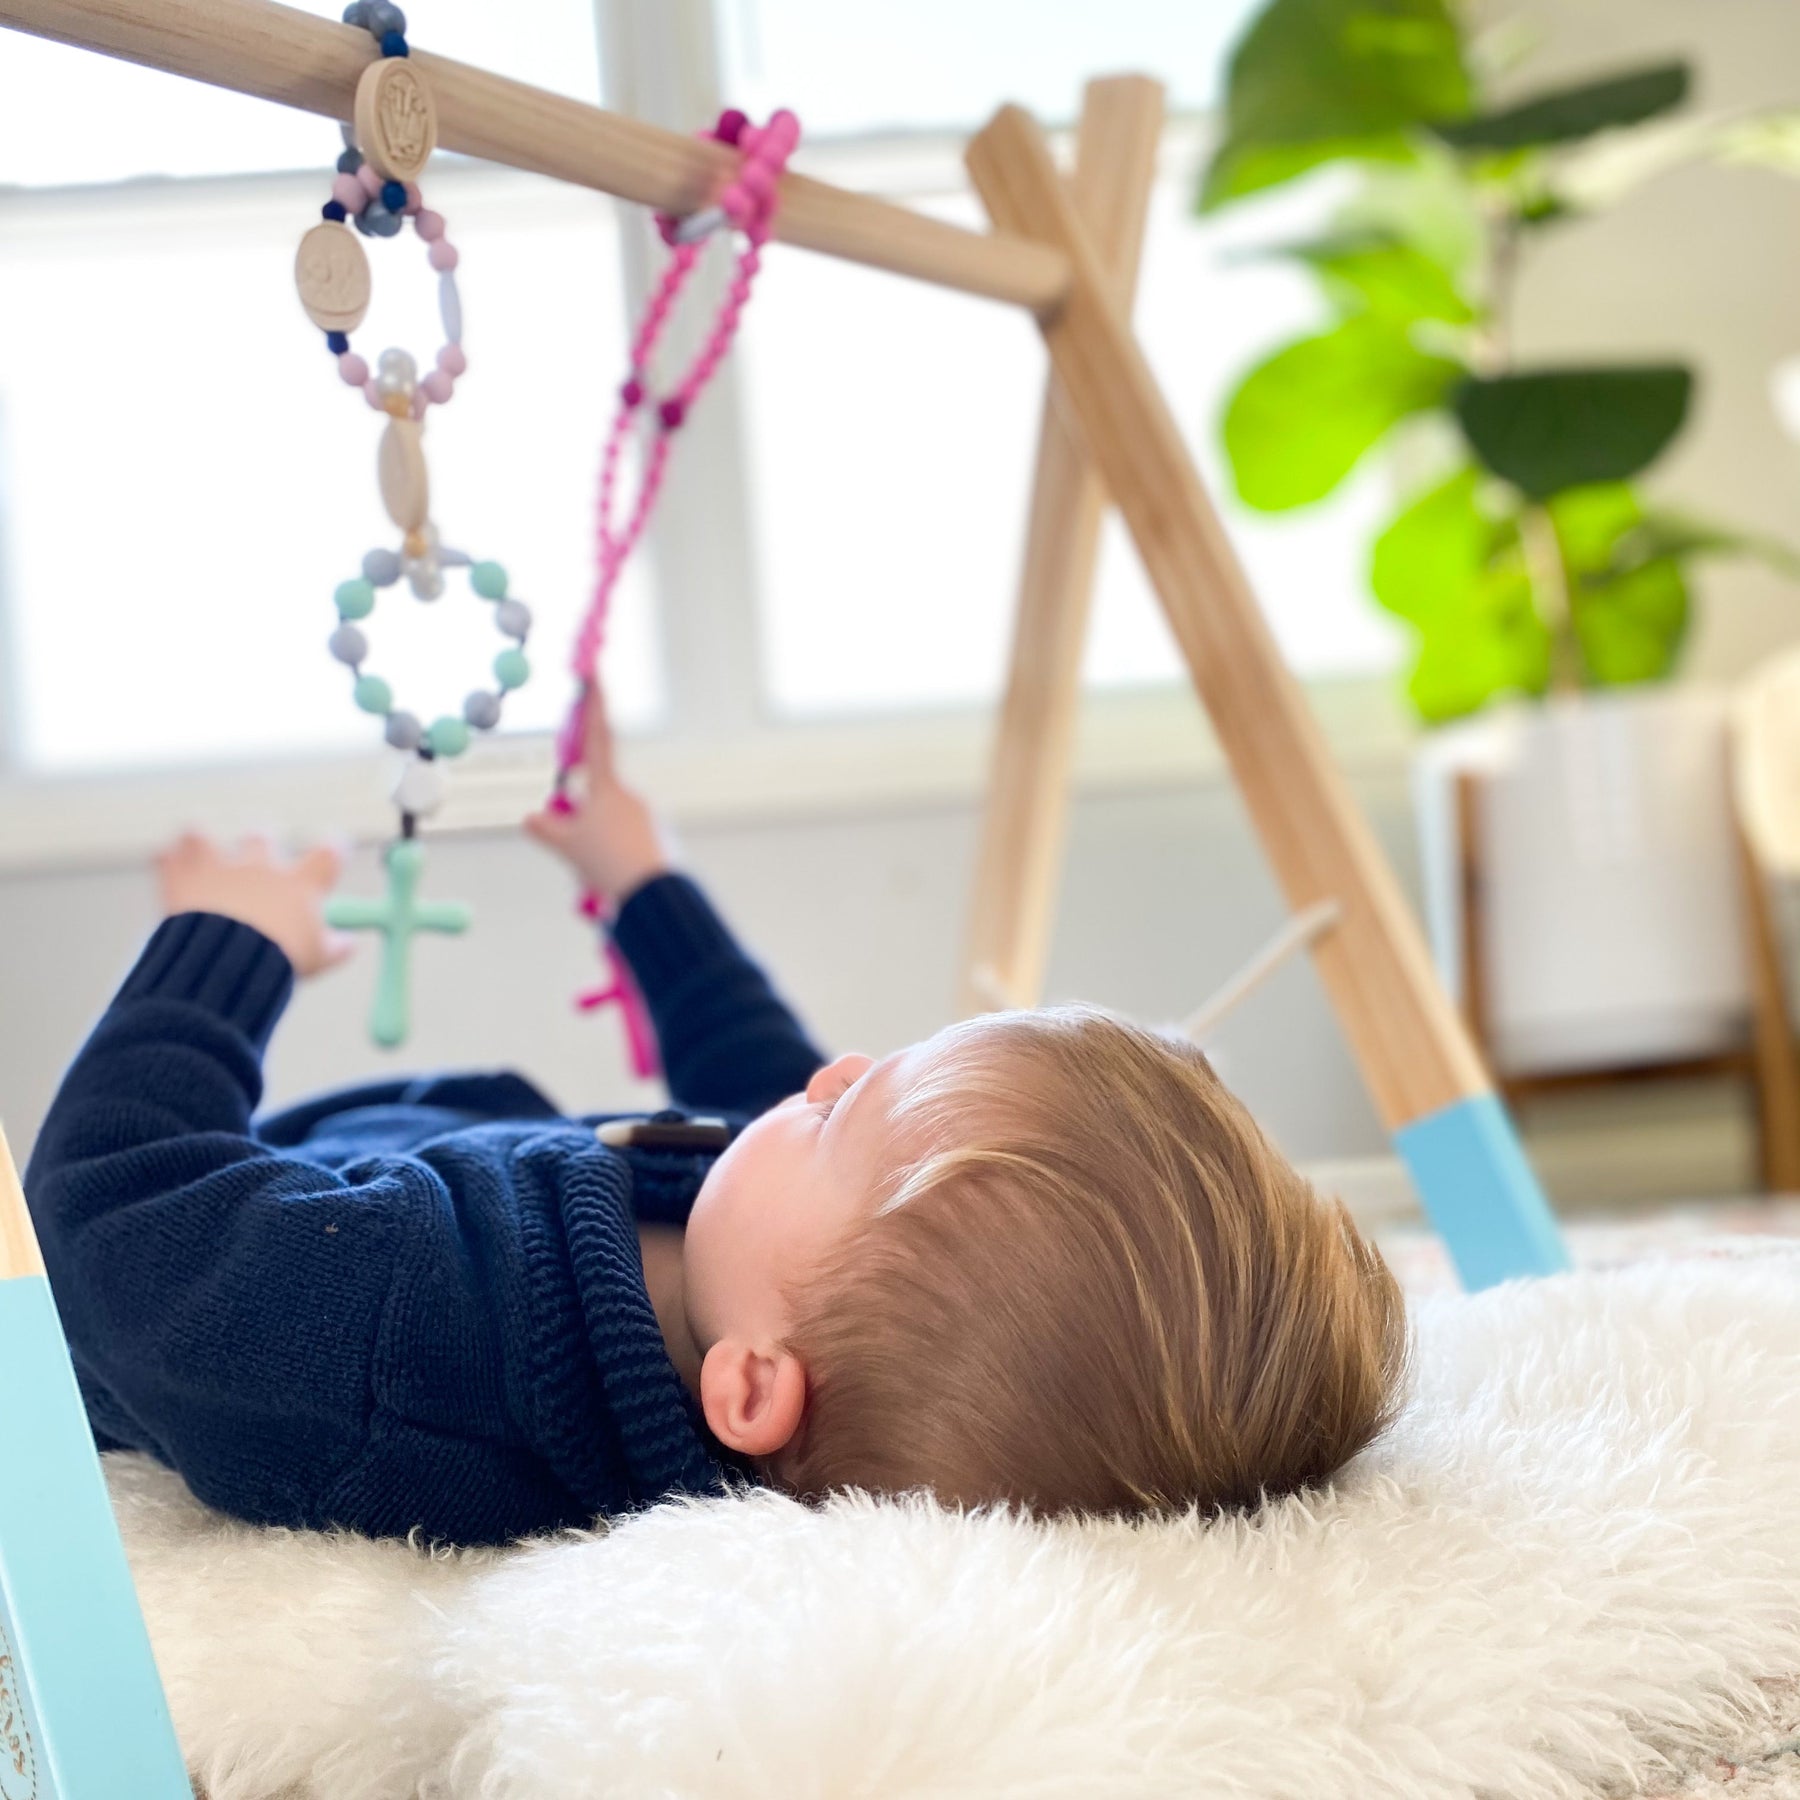 NEW | Wooden Baby Gym